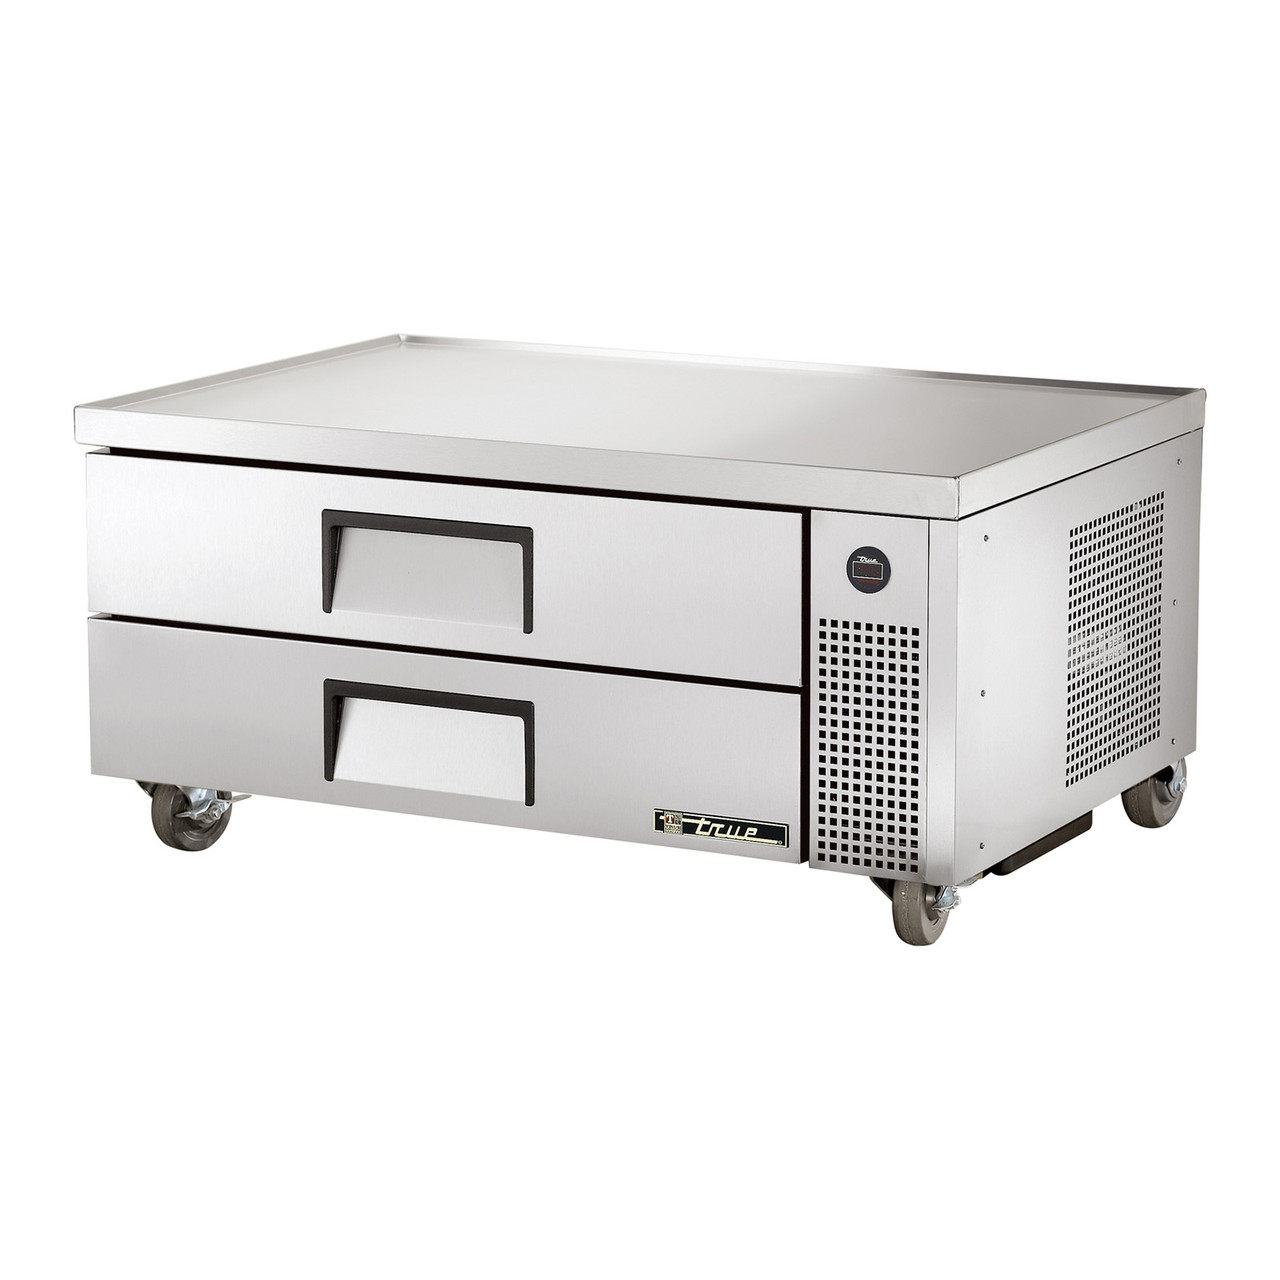 True Manufacturing TRCB-52 Refrigerated Chef's Base 52"